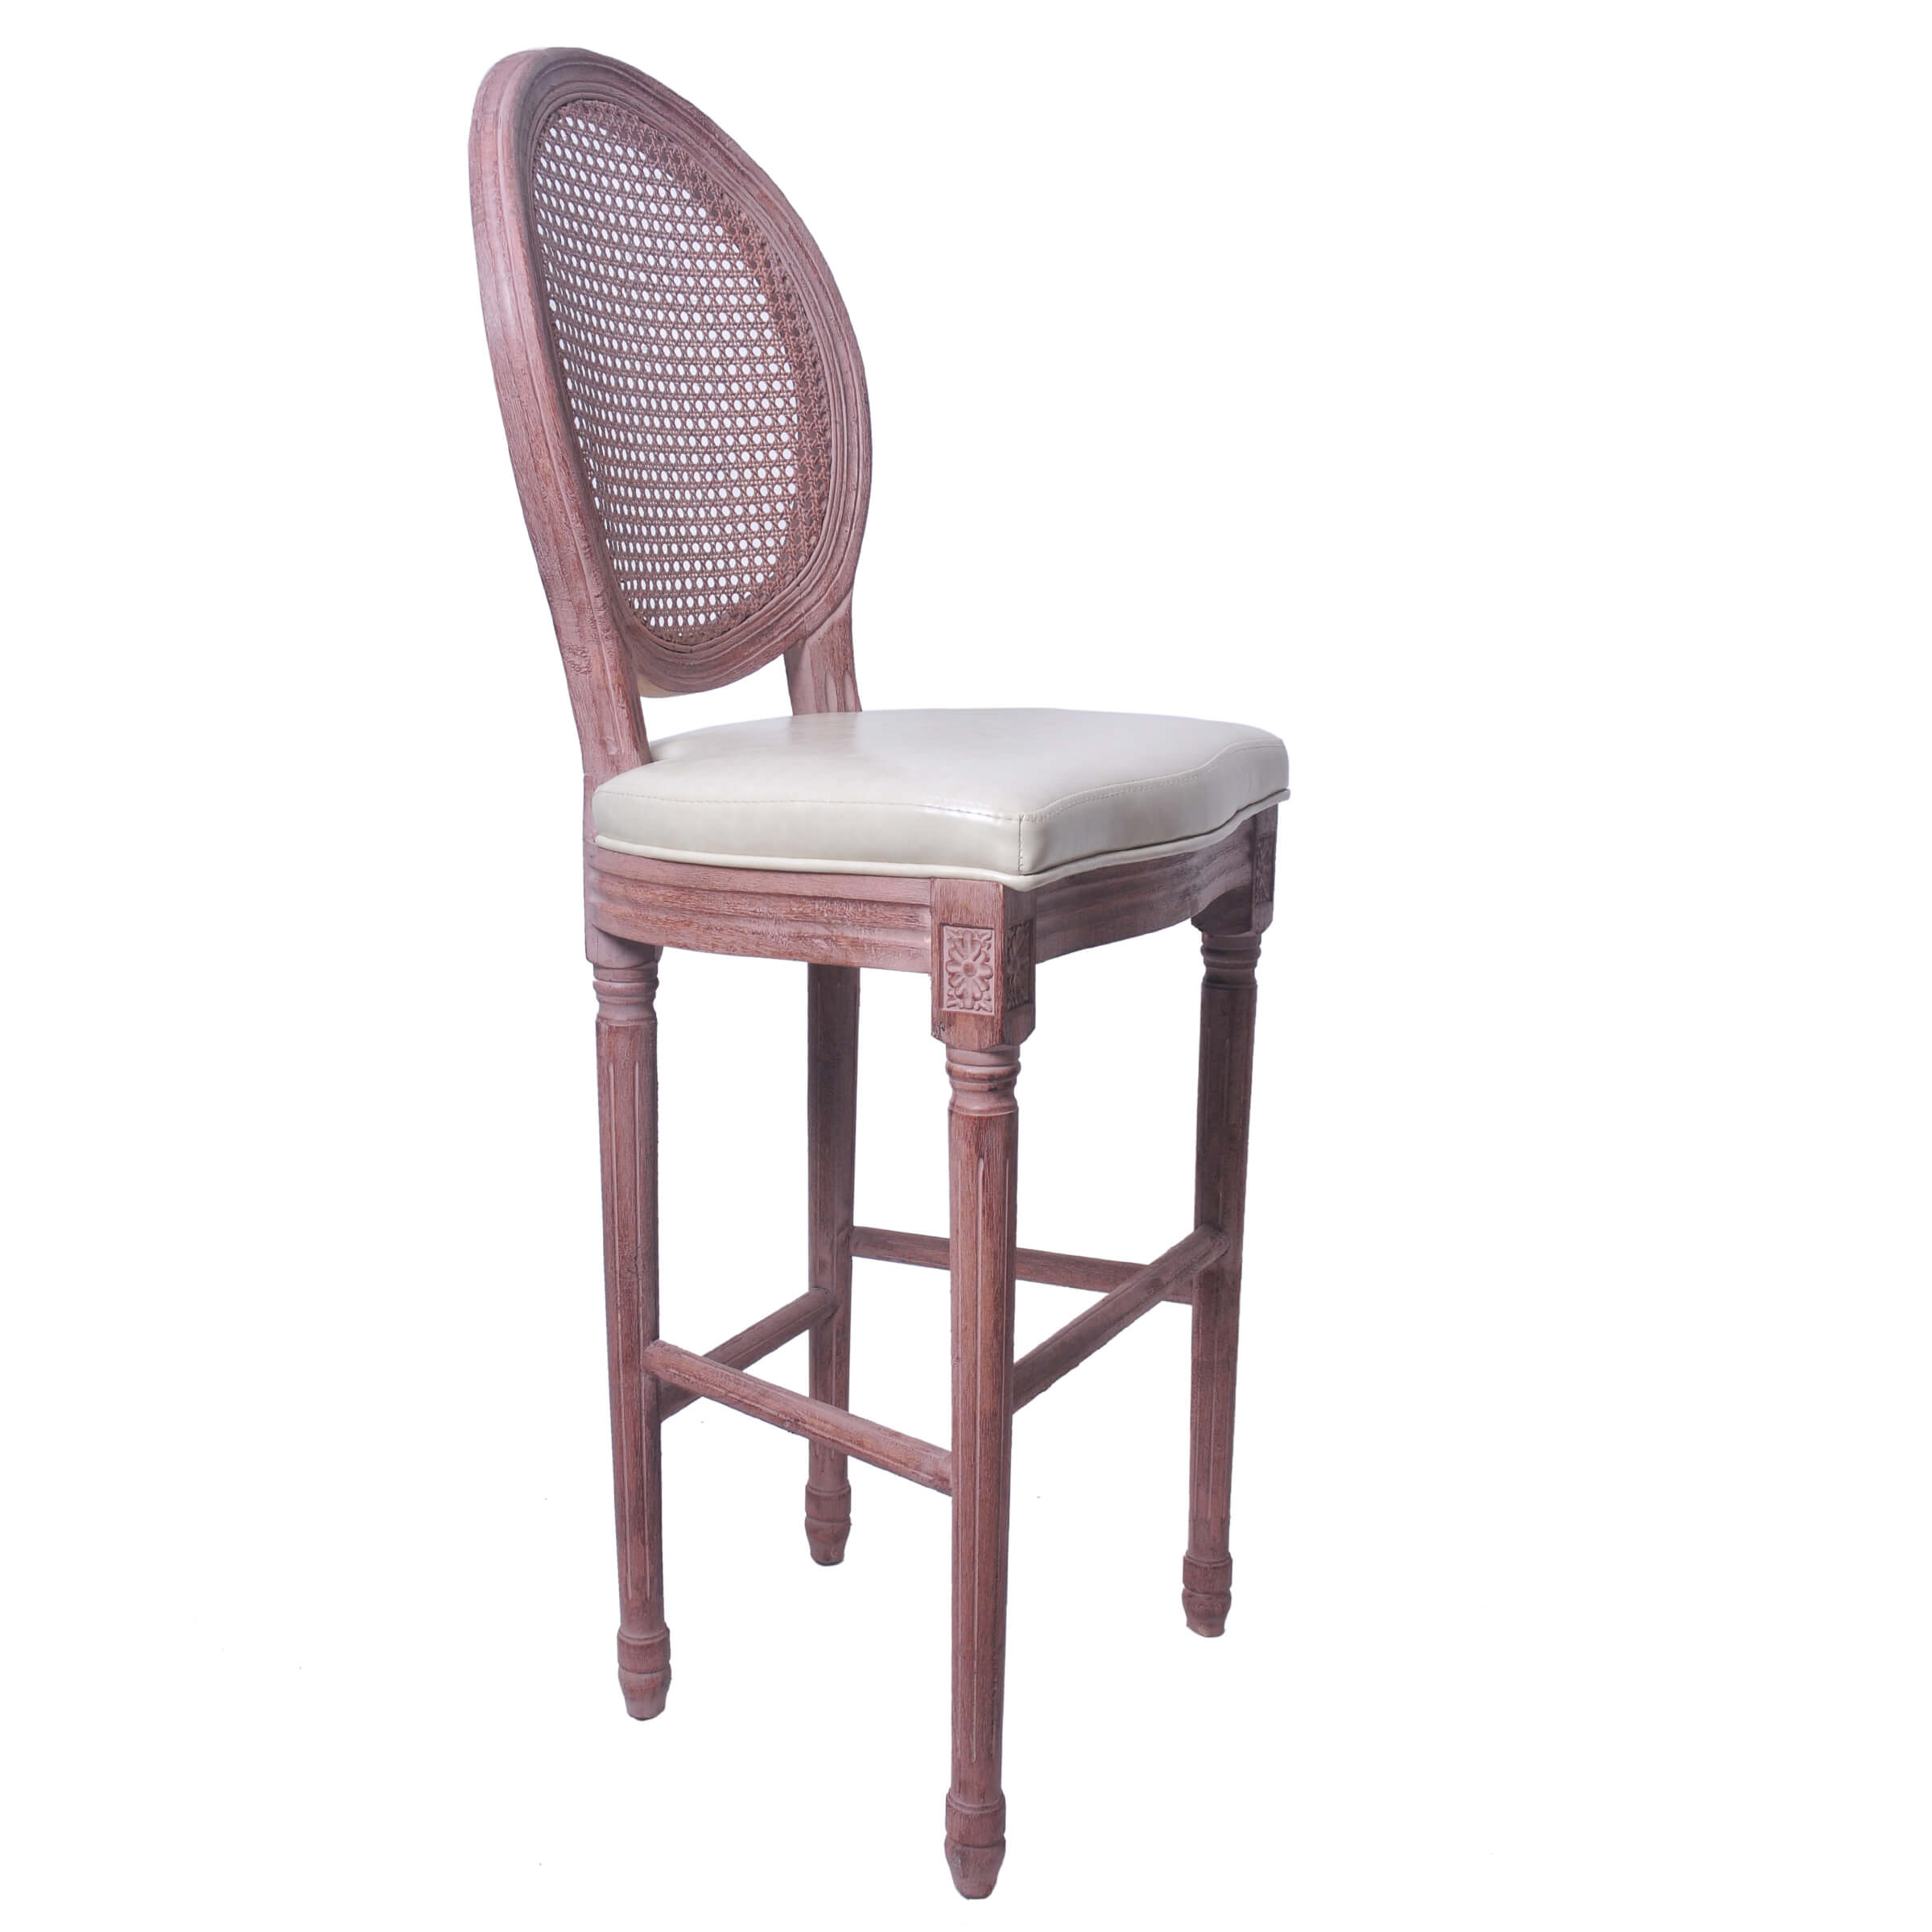 Louis Bar Stools With Backs Supplier, French Cane Back Bar Stools